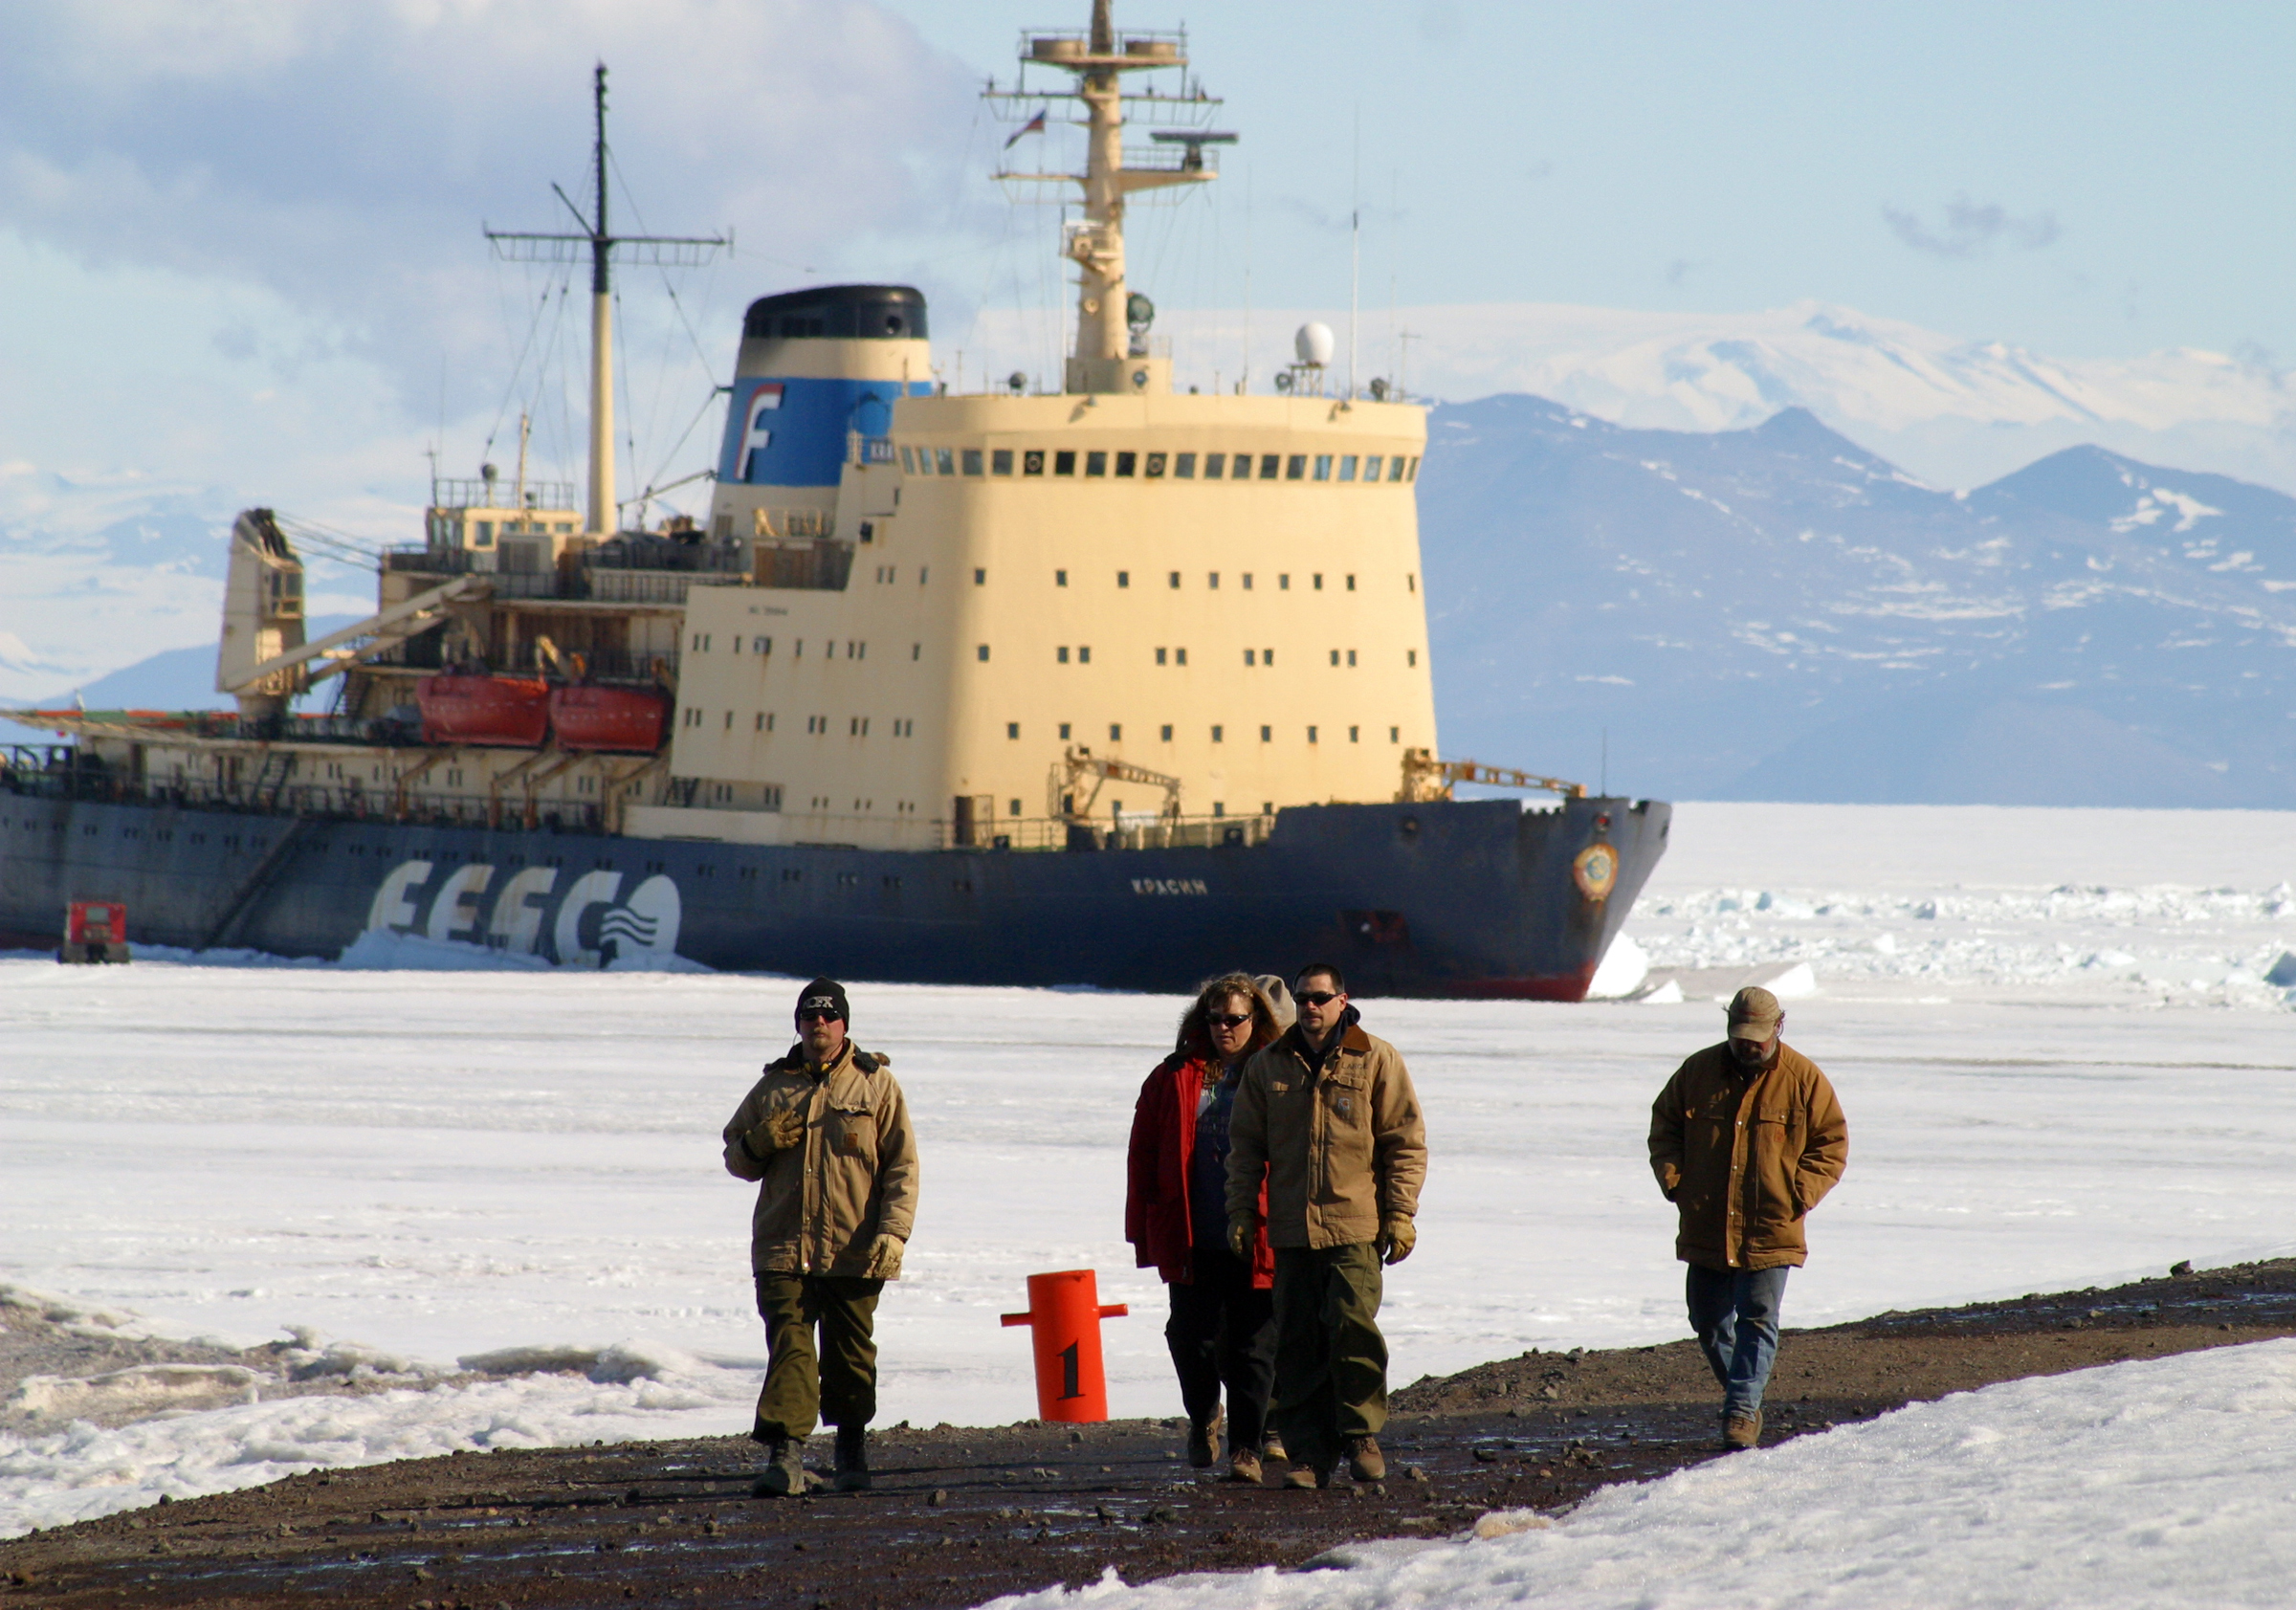 People walk on the shore in front of a boat in the ice.